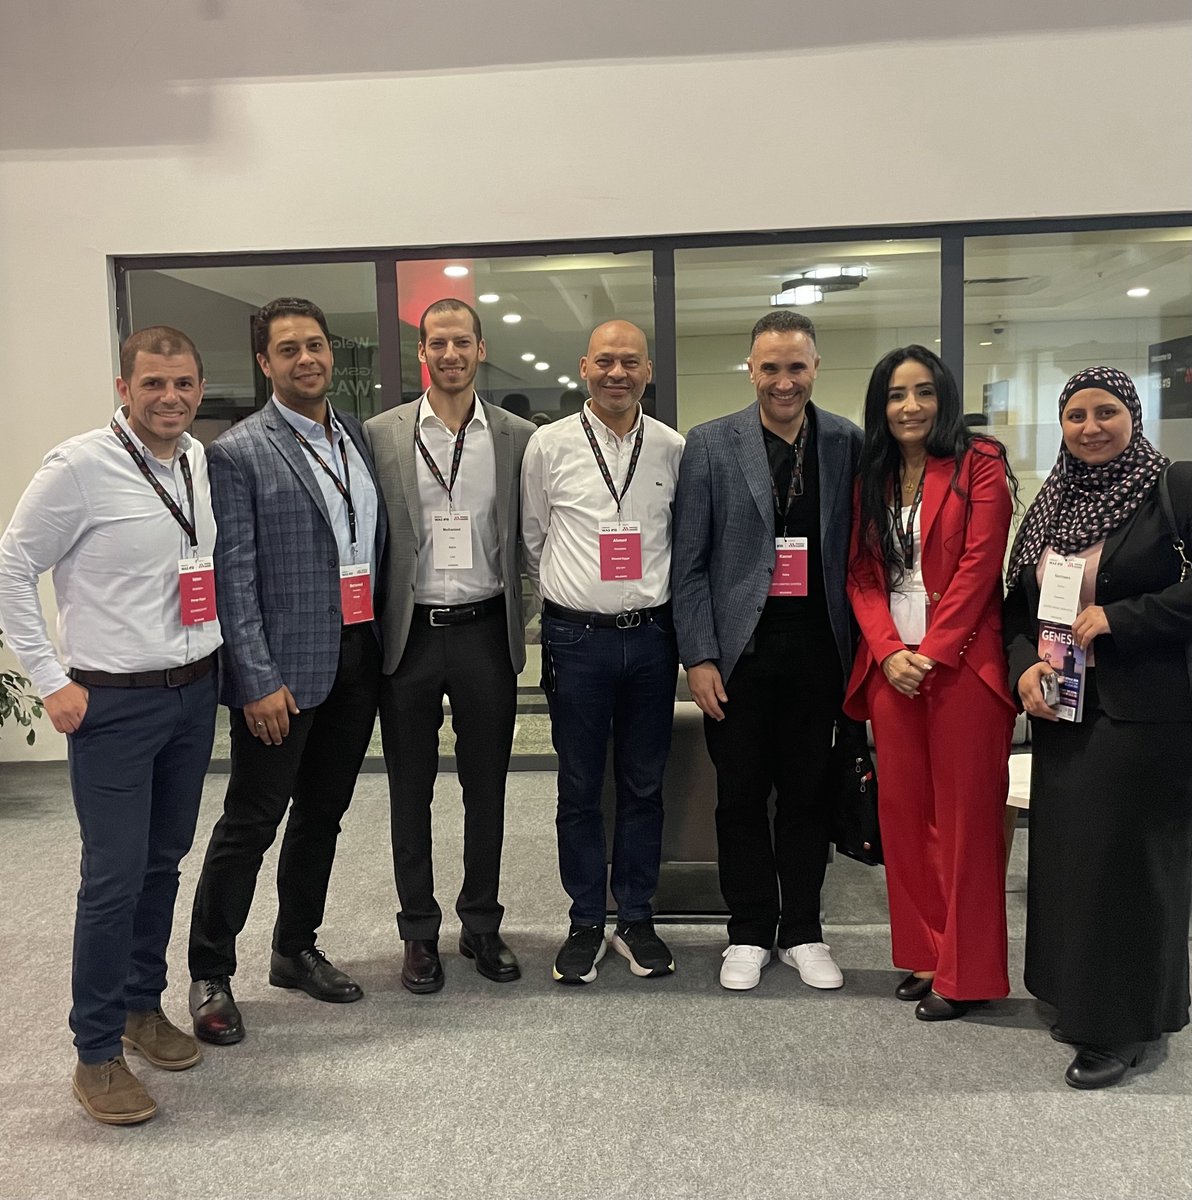 A fruitful Day 2 full of countless meaningful connections at GSMA WAS#19.

#WAS19 #saas #A2P #Security #MobileTech #Marketing #GSMA #istanbul #turkey #mena #cequens #communicationsolutions